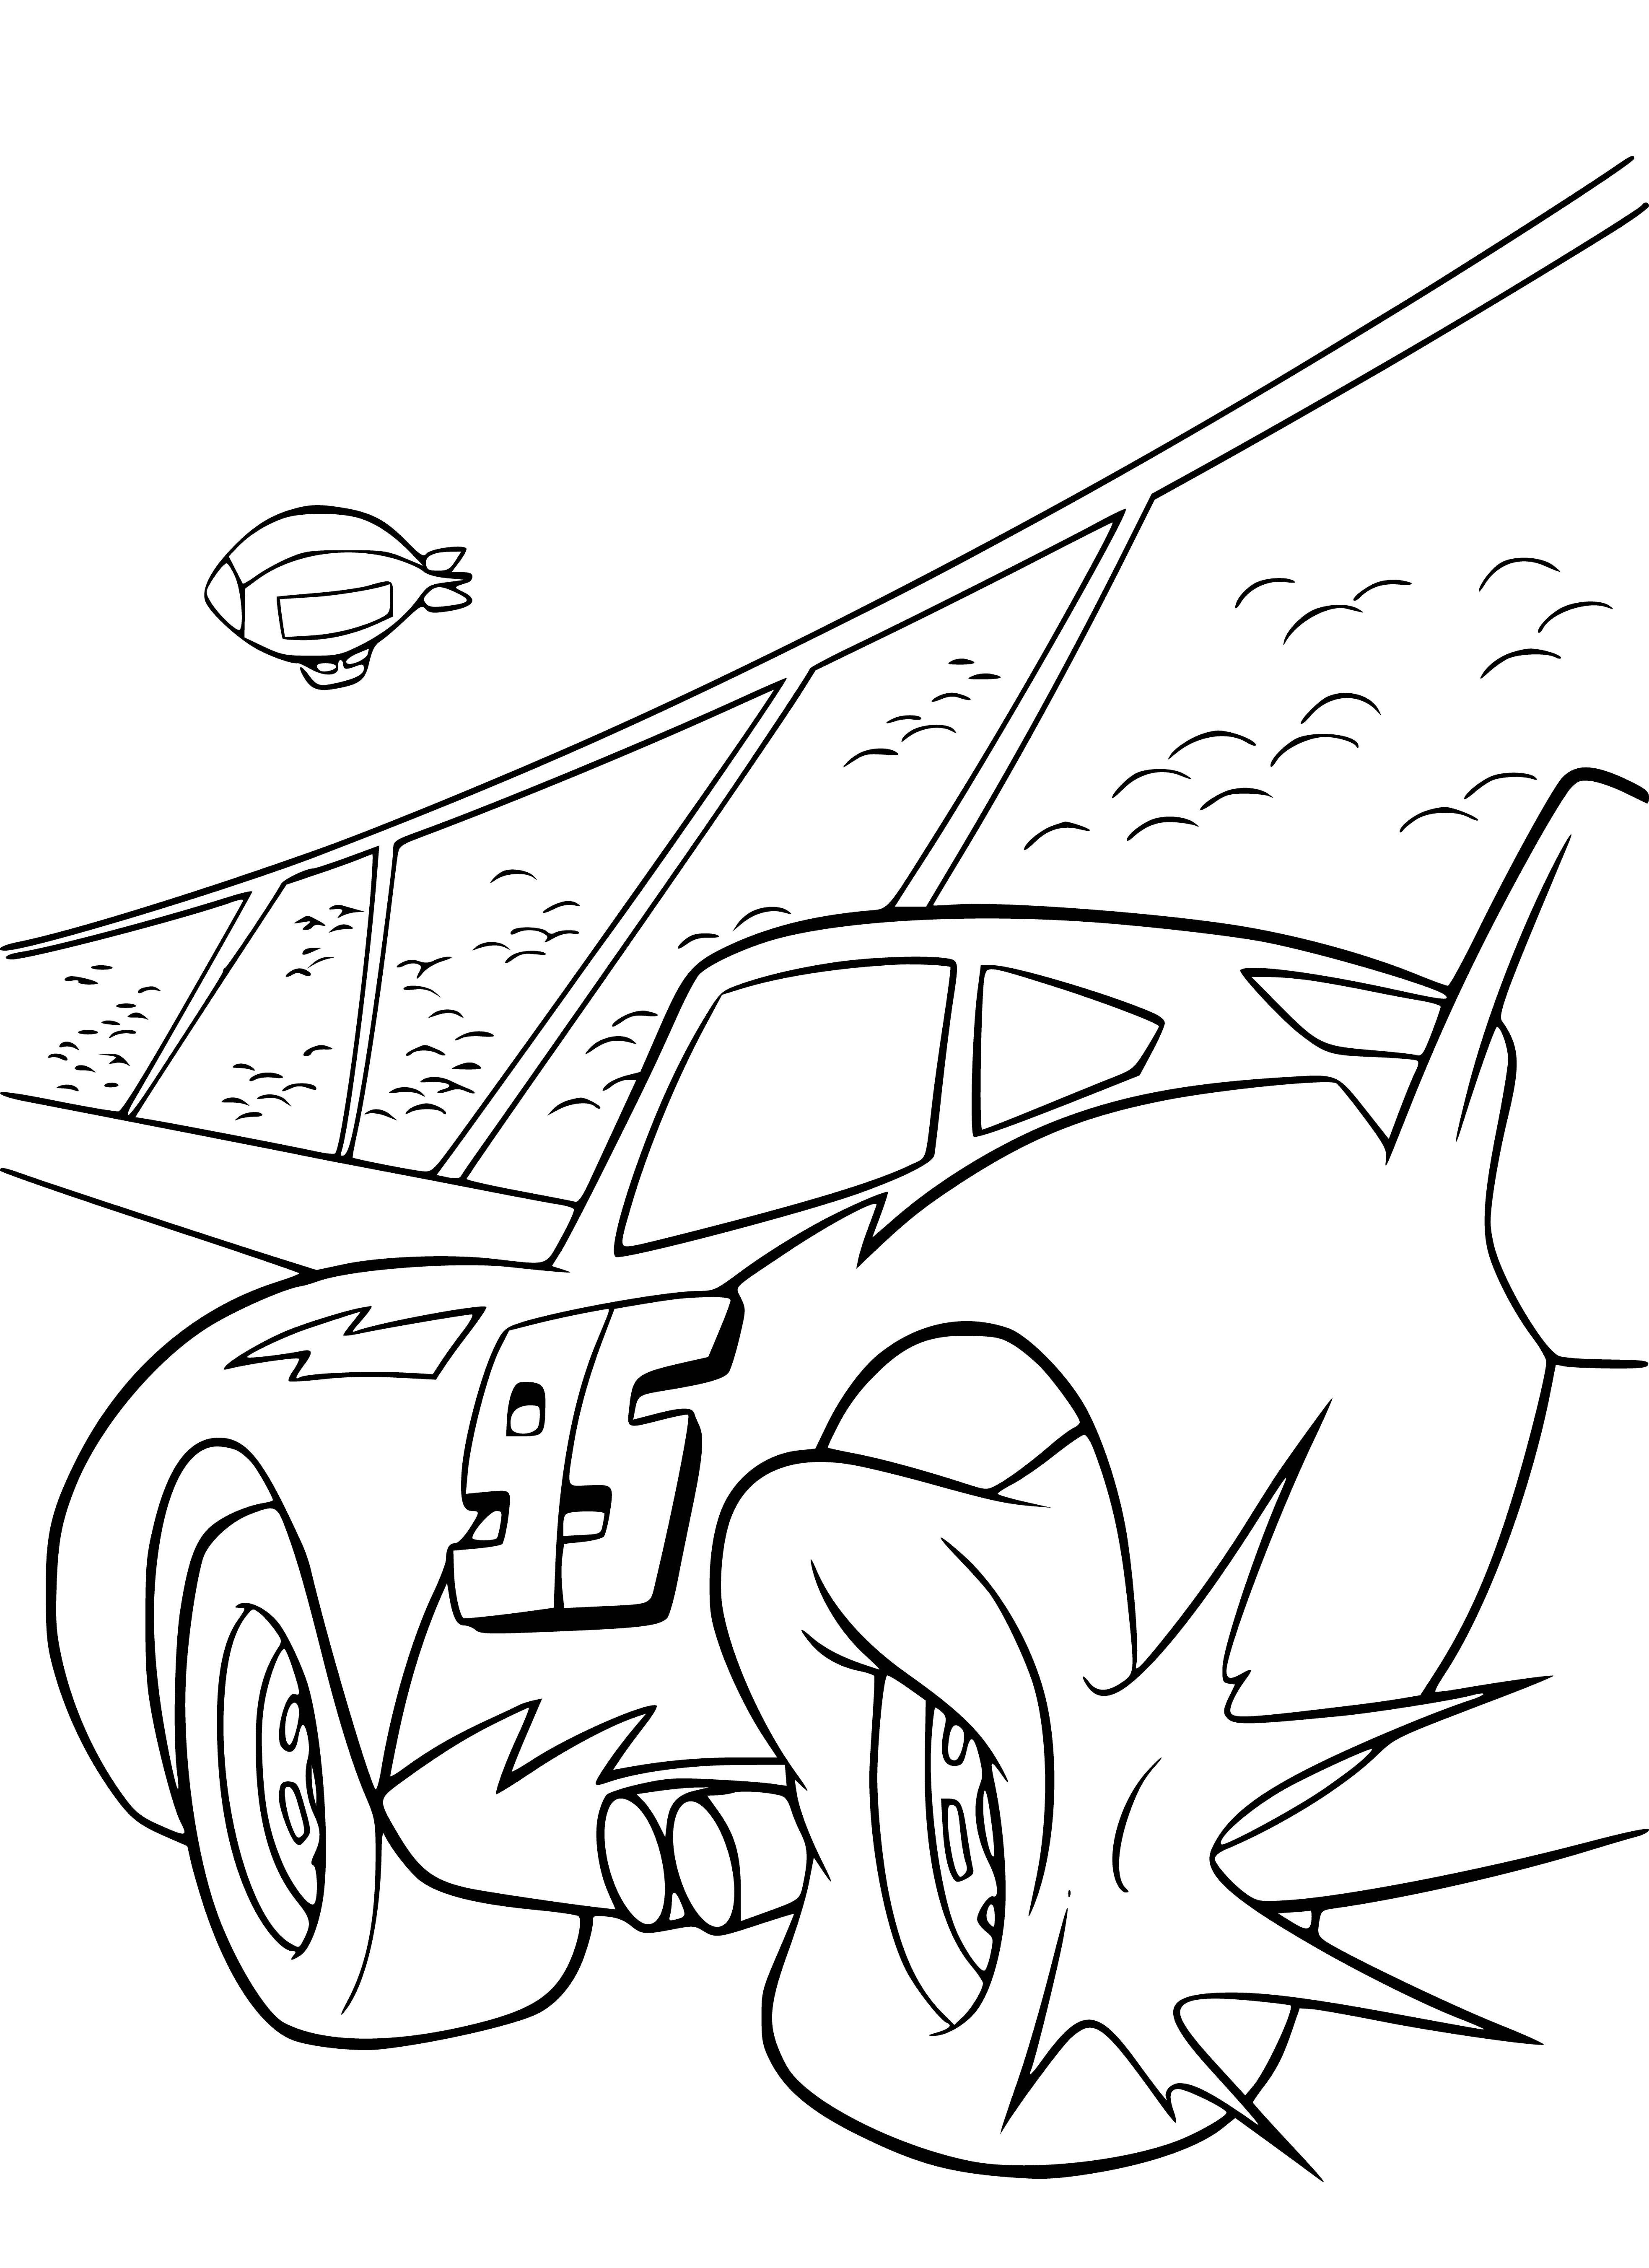 The wheel burst coloring page